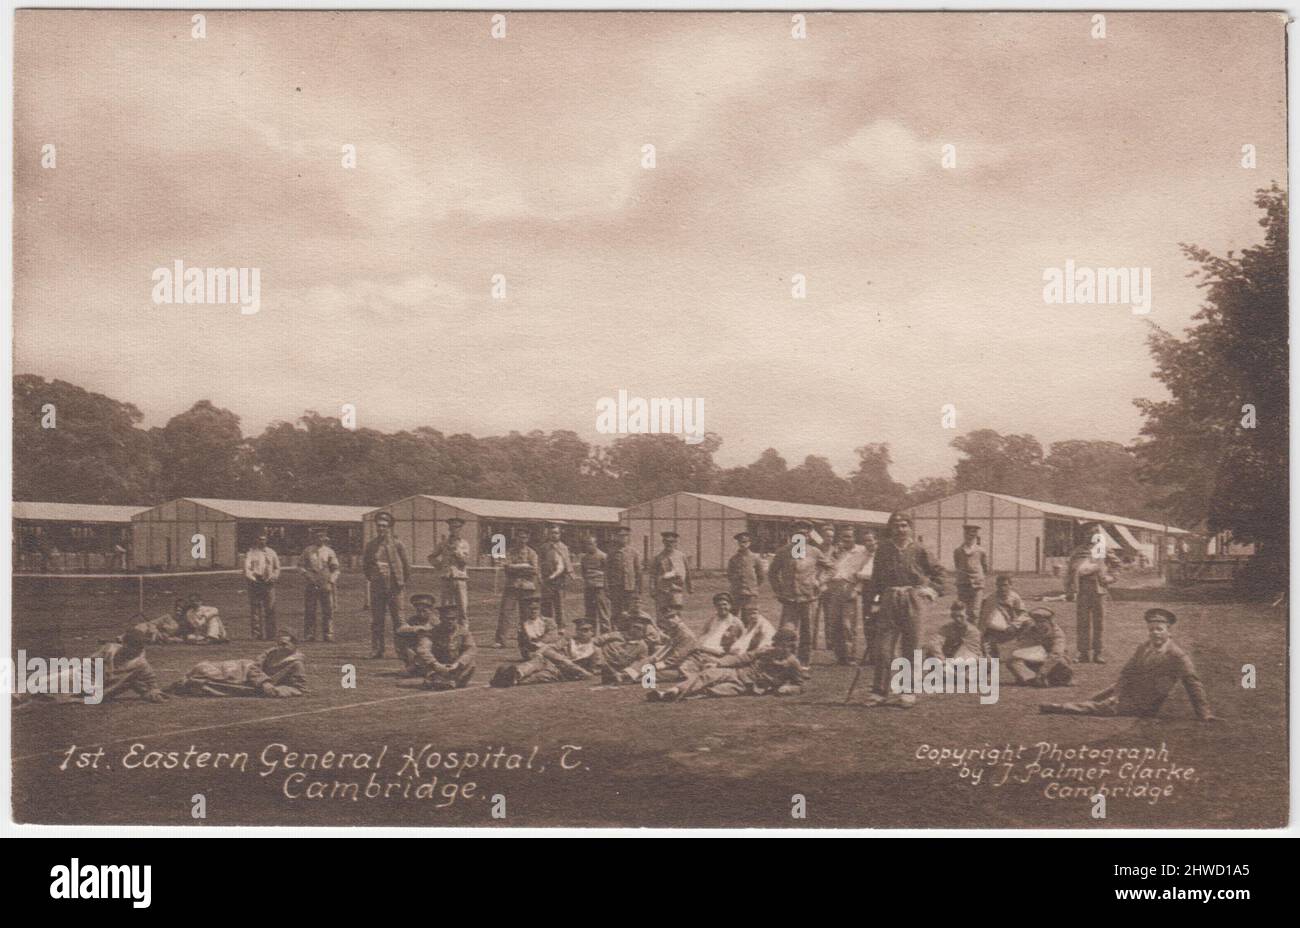 1st Eastern General Hospital, Cambridge, First World War. Wounded soldiers outside the barrack blocks. Postcard published by J. Palmer Clarke, Cambridge Stock Photo